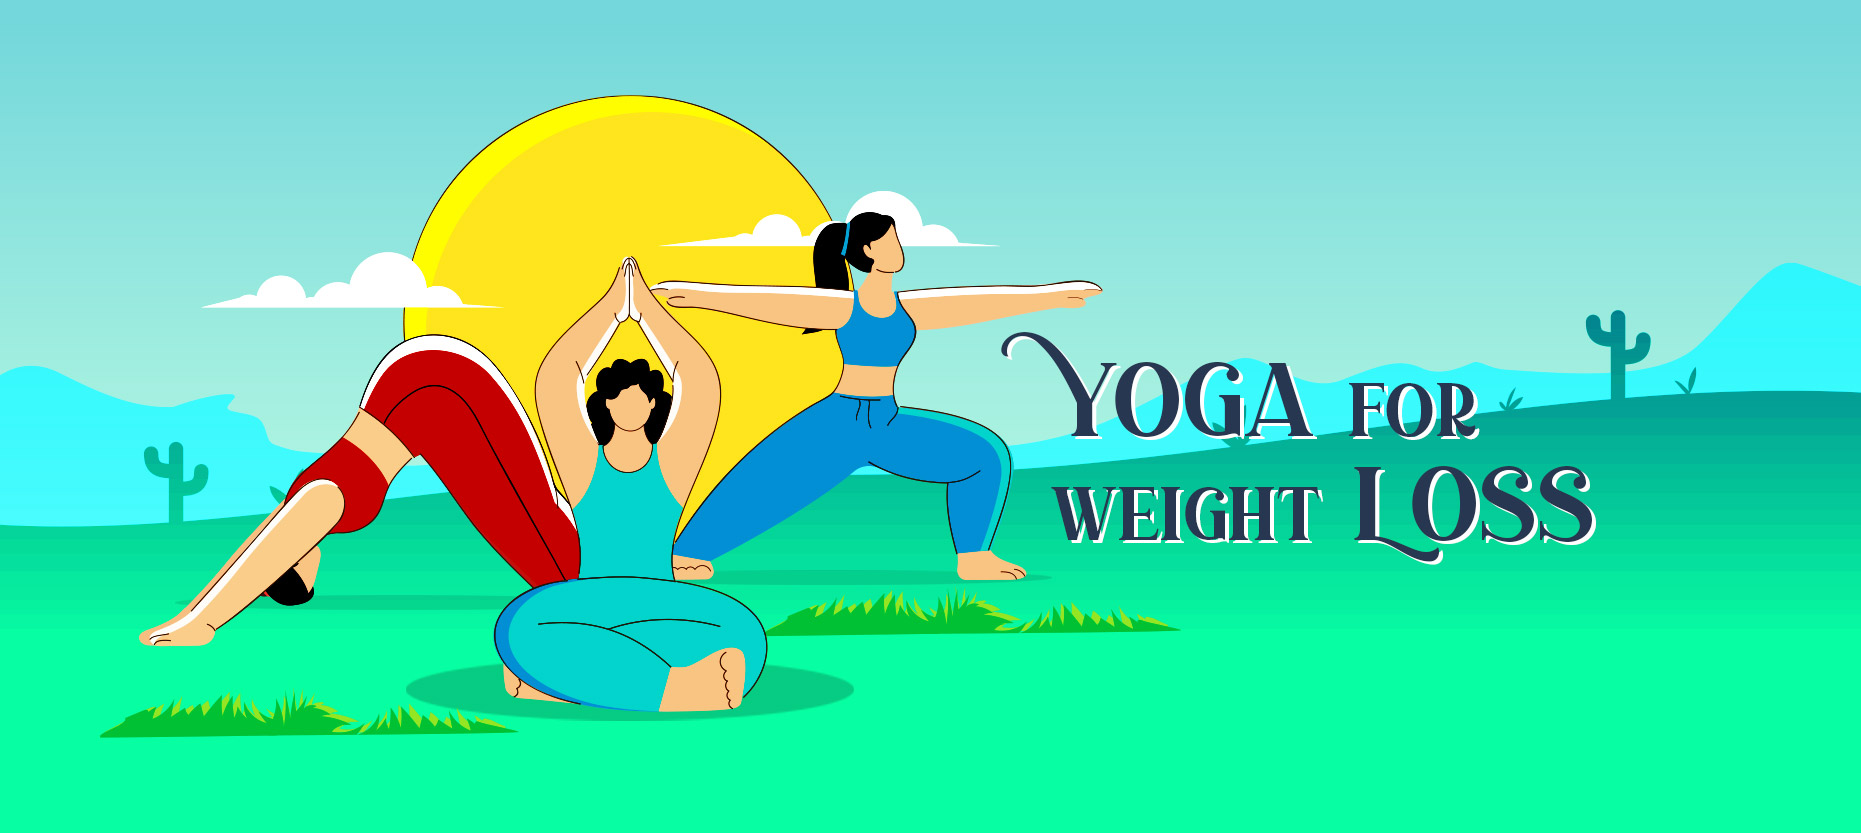 Yoga for weight loss